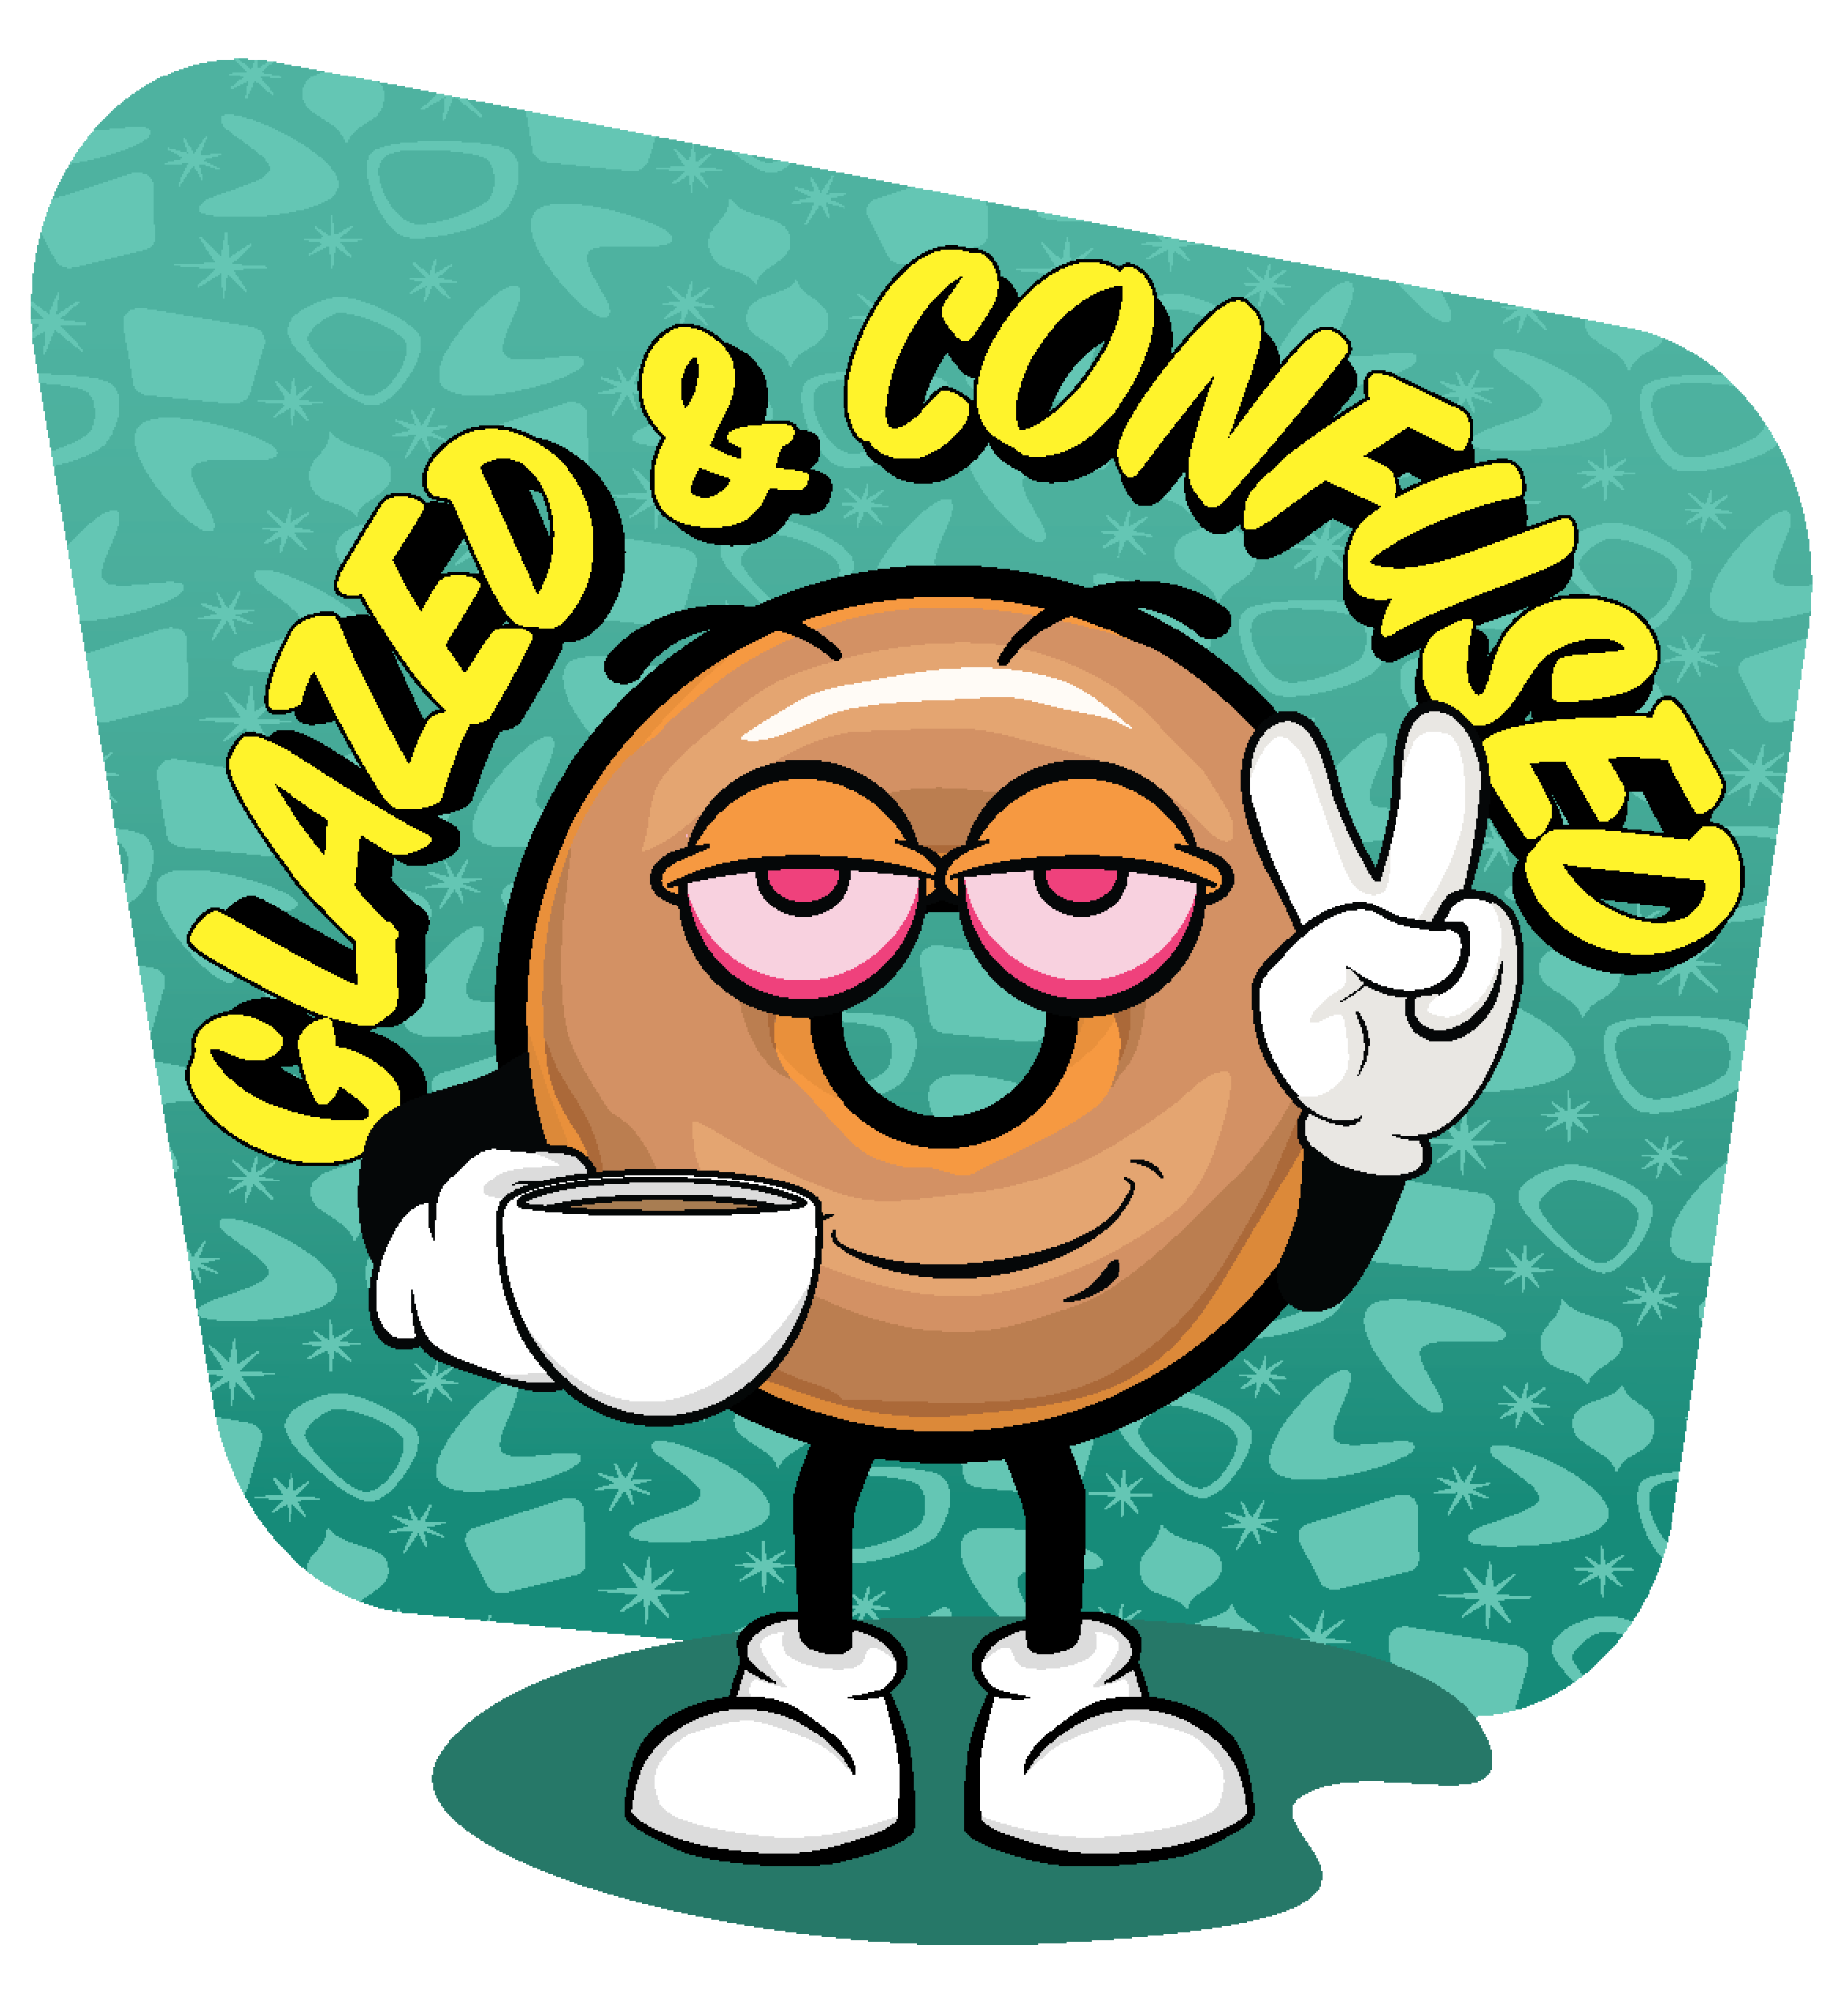 Glazed and Confused logo